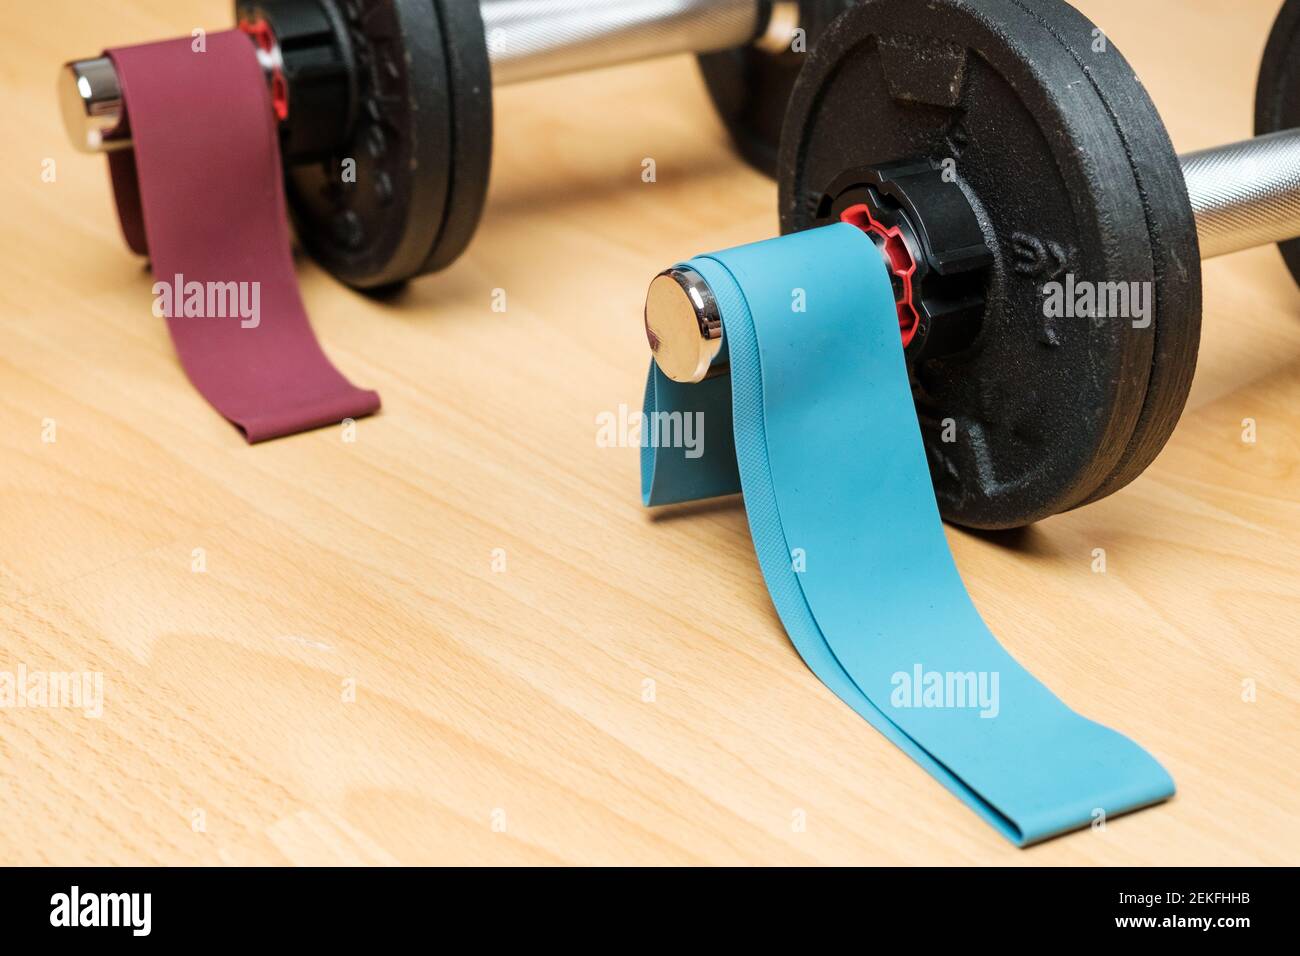 Dumbbells and elastic bands on the floor at home. Keeping fit during lockdown. Fitness equipment for strength training  Stock Photo